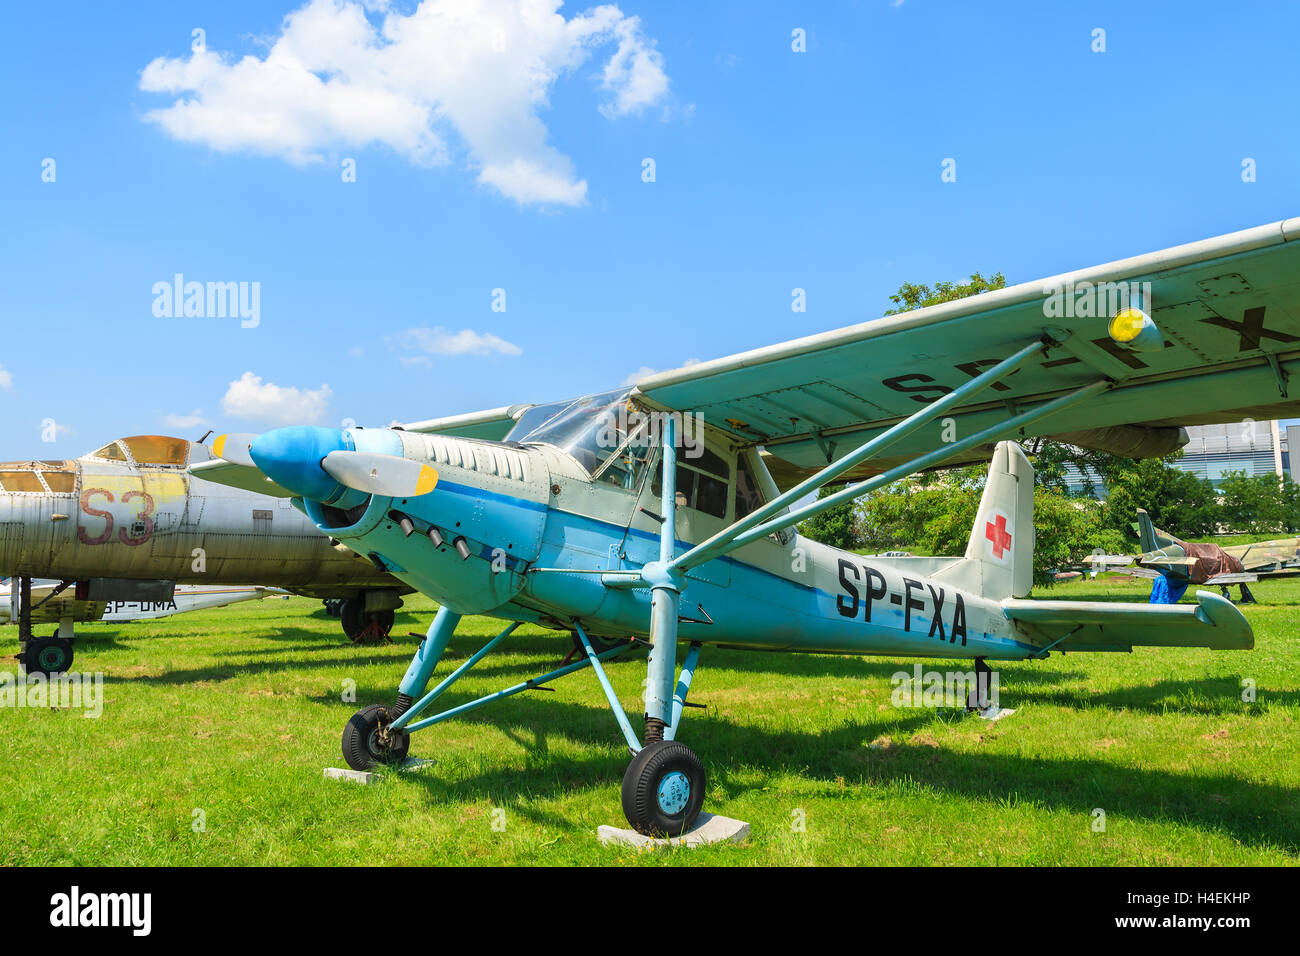 KRAKOW MUSEUM OF AVIATION, POLAND - JUL 27, 2014: classic old aircraft on exhibition in outdoor museum of aviation history in Krakow, Poland. In summer often airshows take place here. Stock Photo